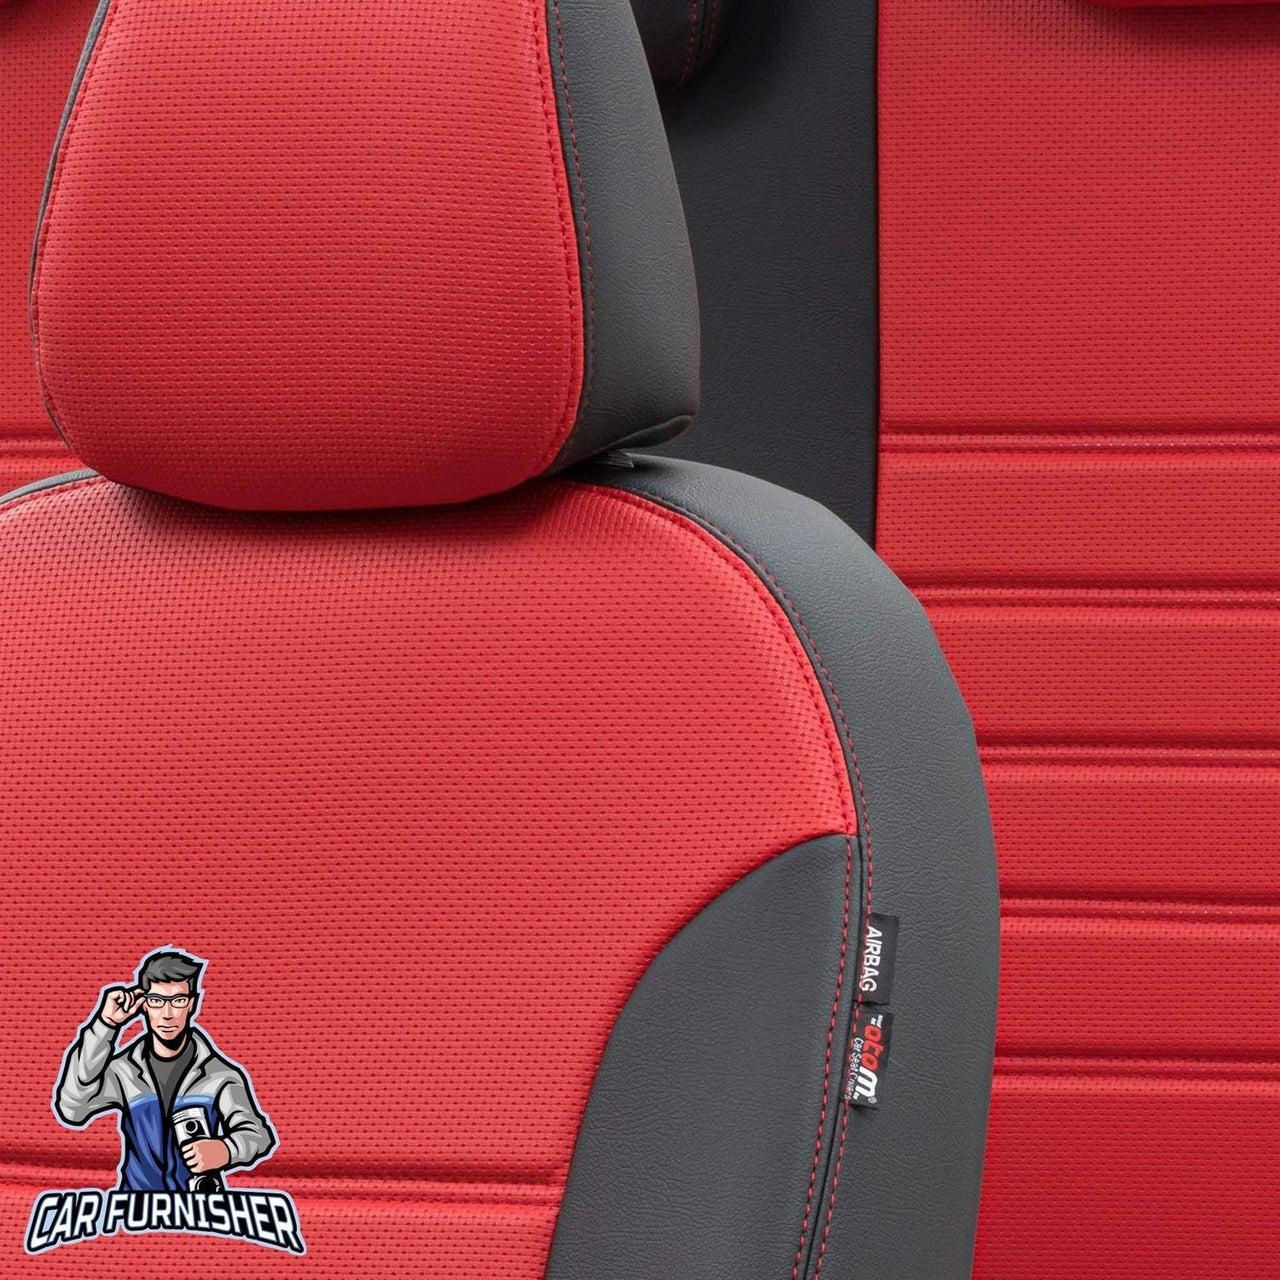 Cupra Formentor Seat Covers New York Leather Design Red Leather